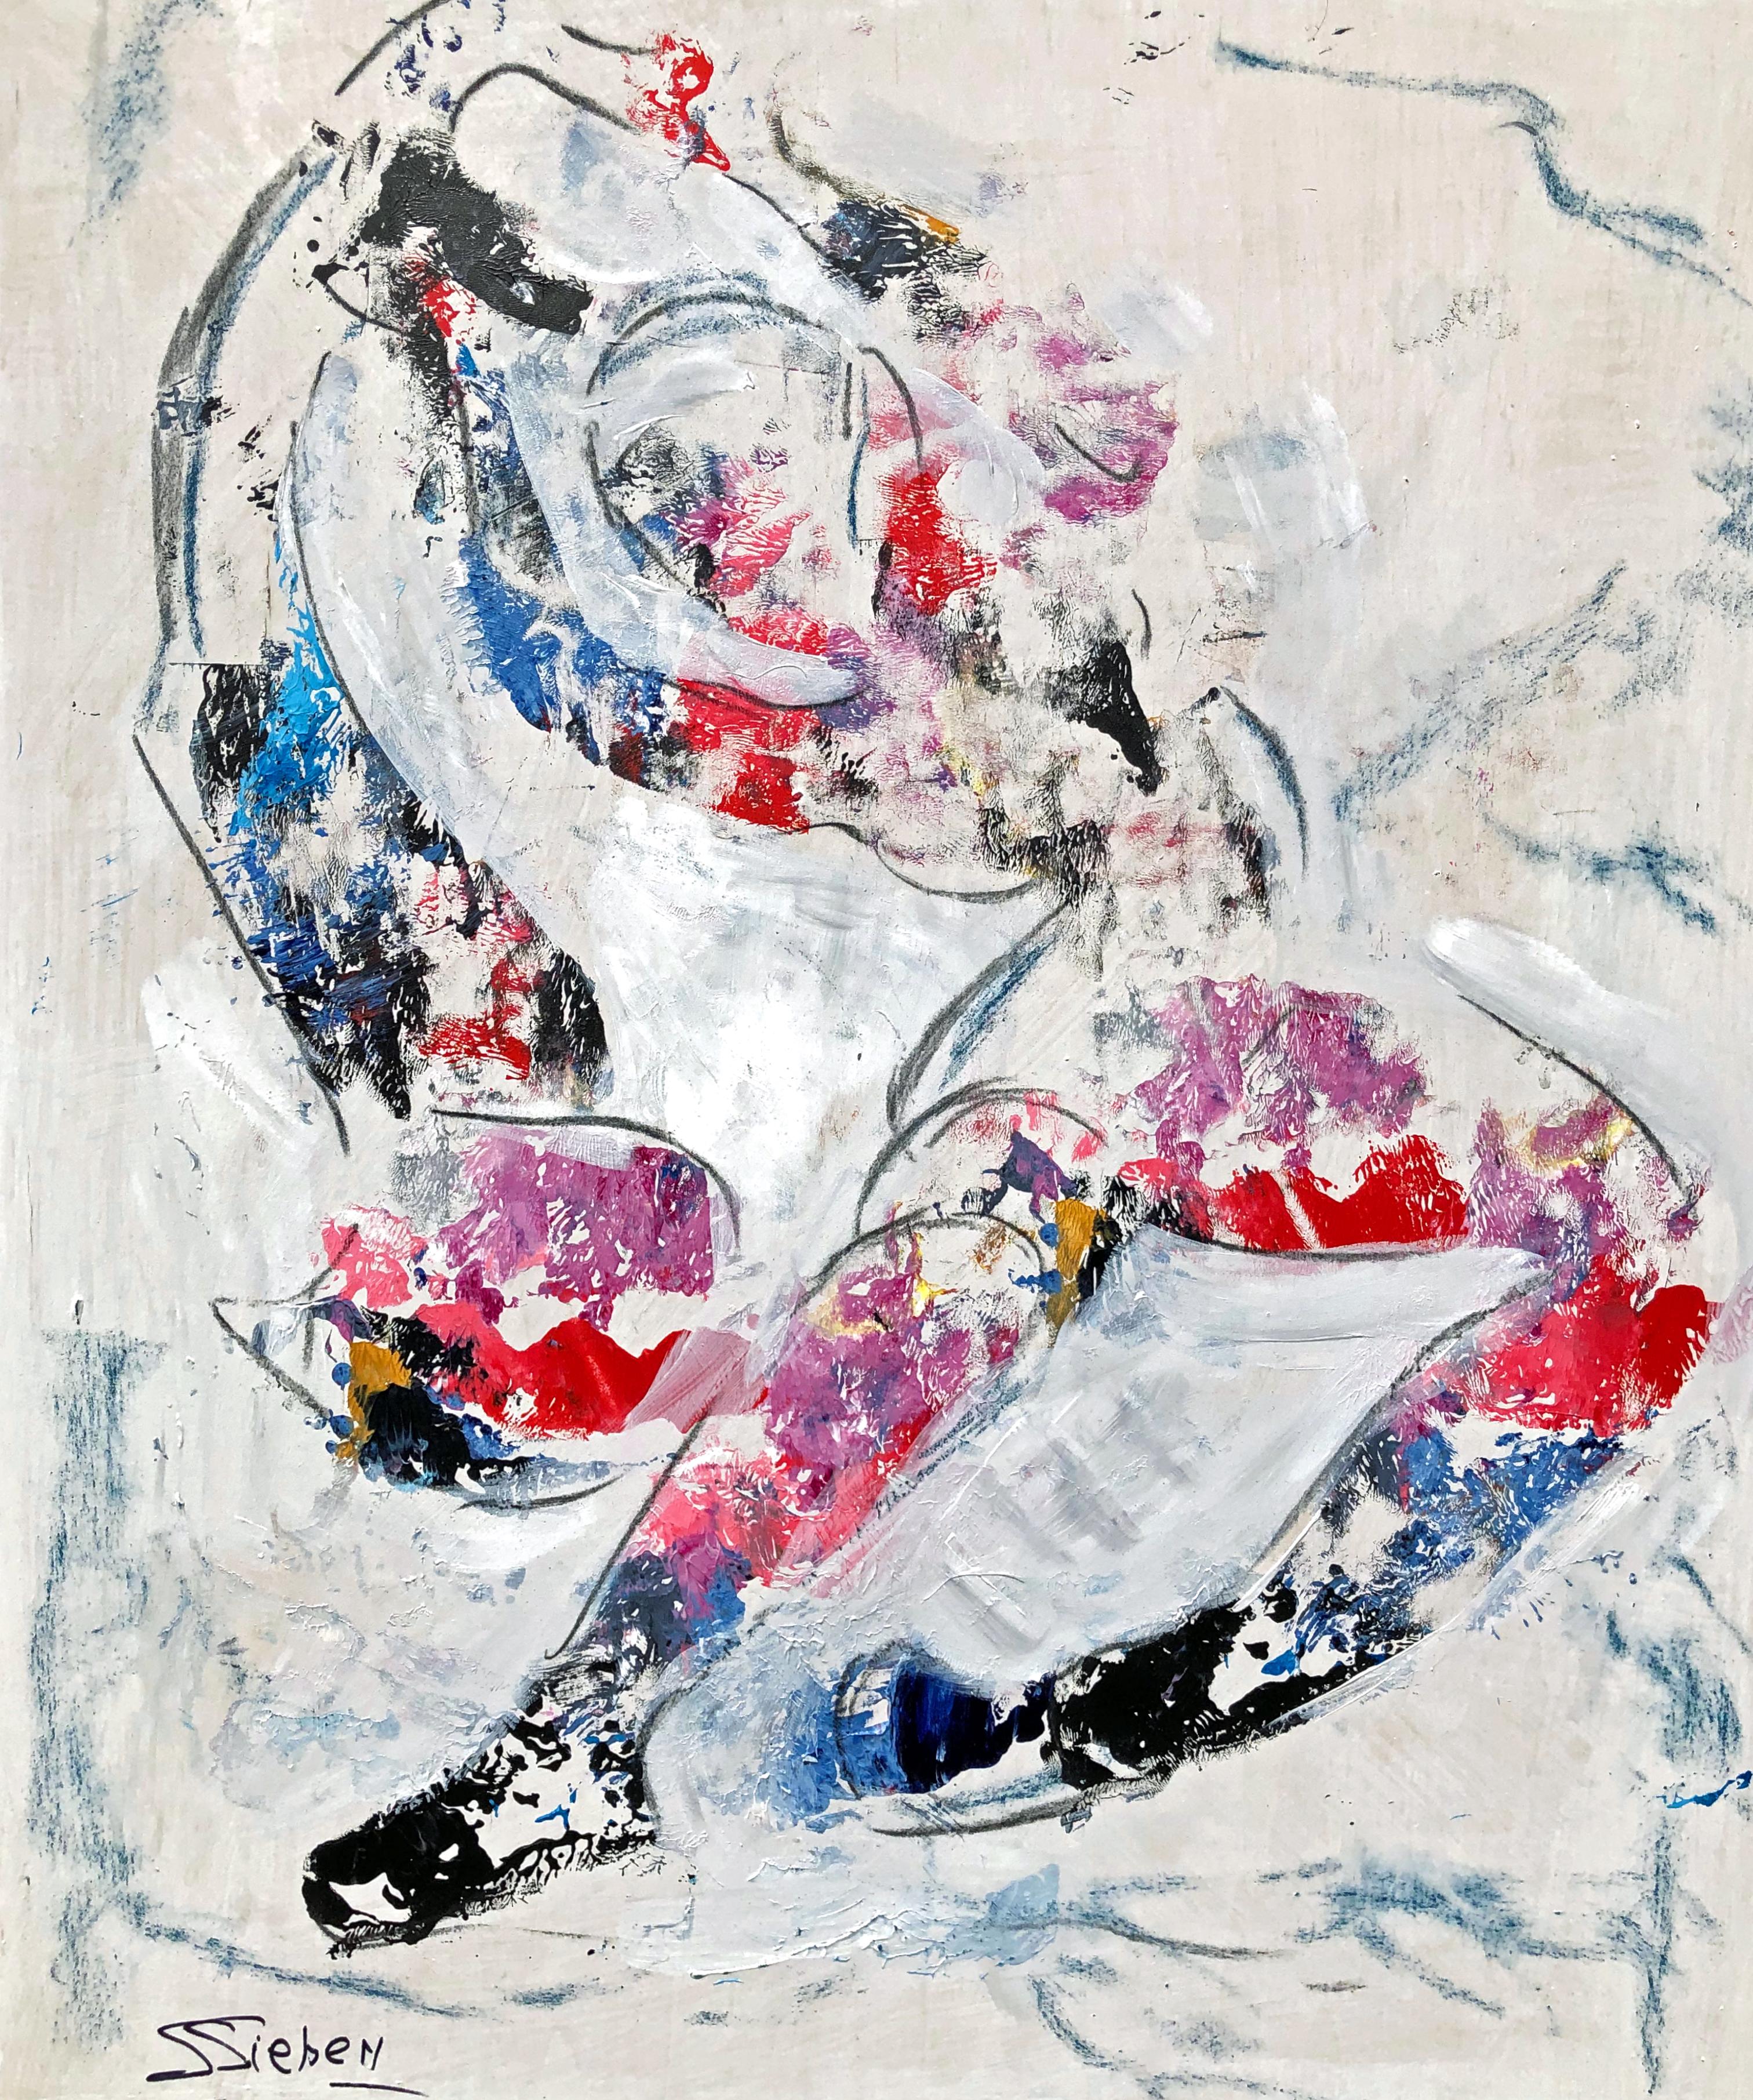 <p>Artist Comments<br />In this fluid figurative abstraction, artist Sharon Sieben contains explosions of color within studied lines. Using an almost all white backdrop, the dancer appears to float, swaying elegantly. "I gathered random patches of